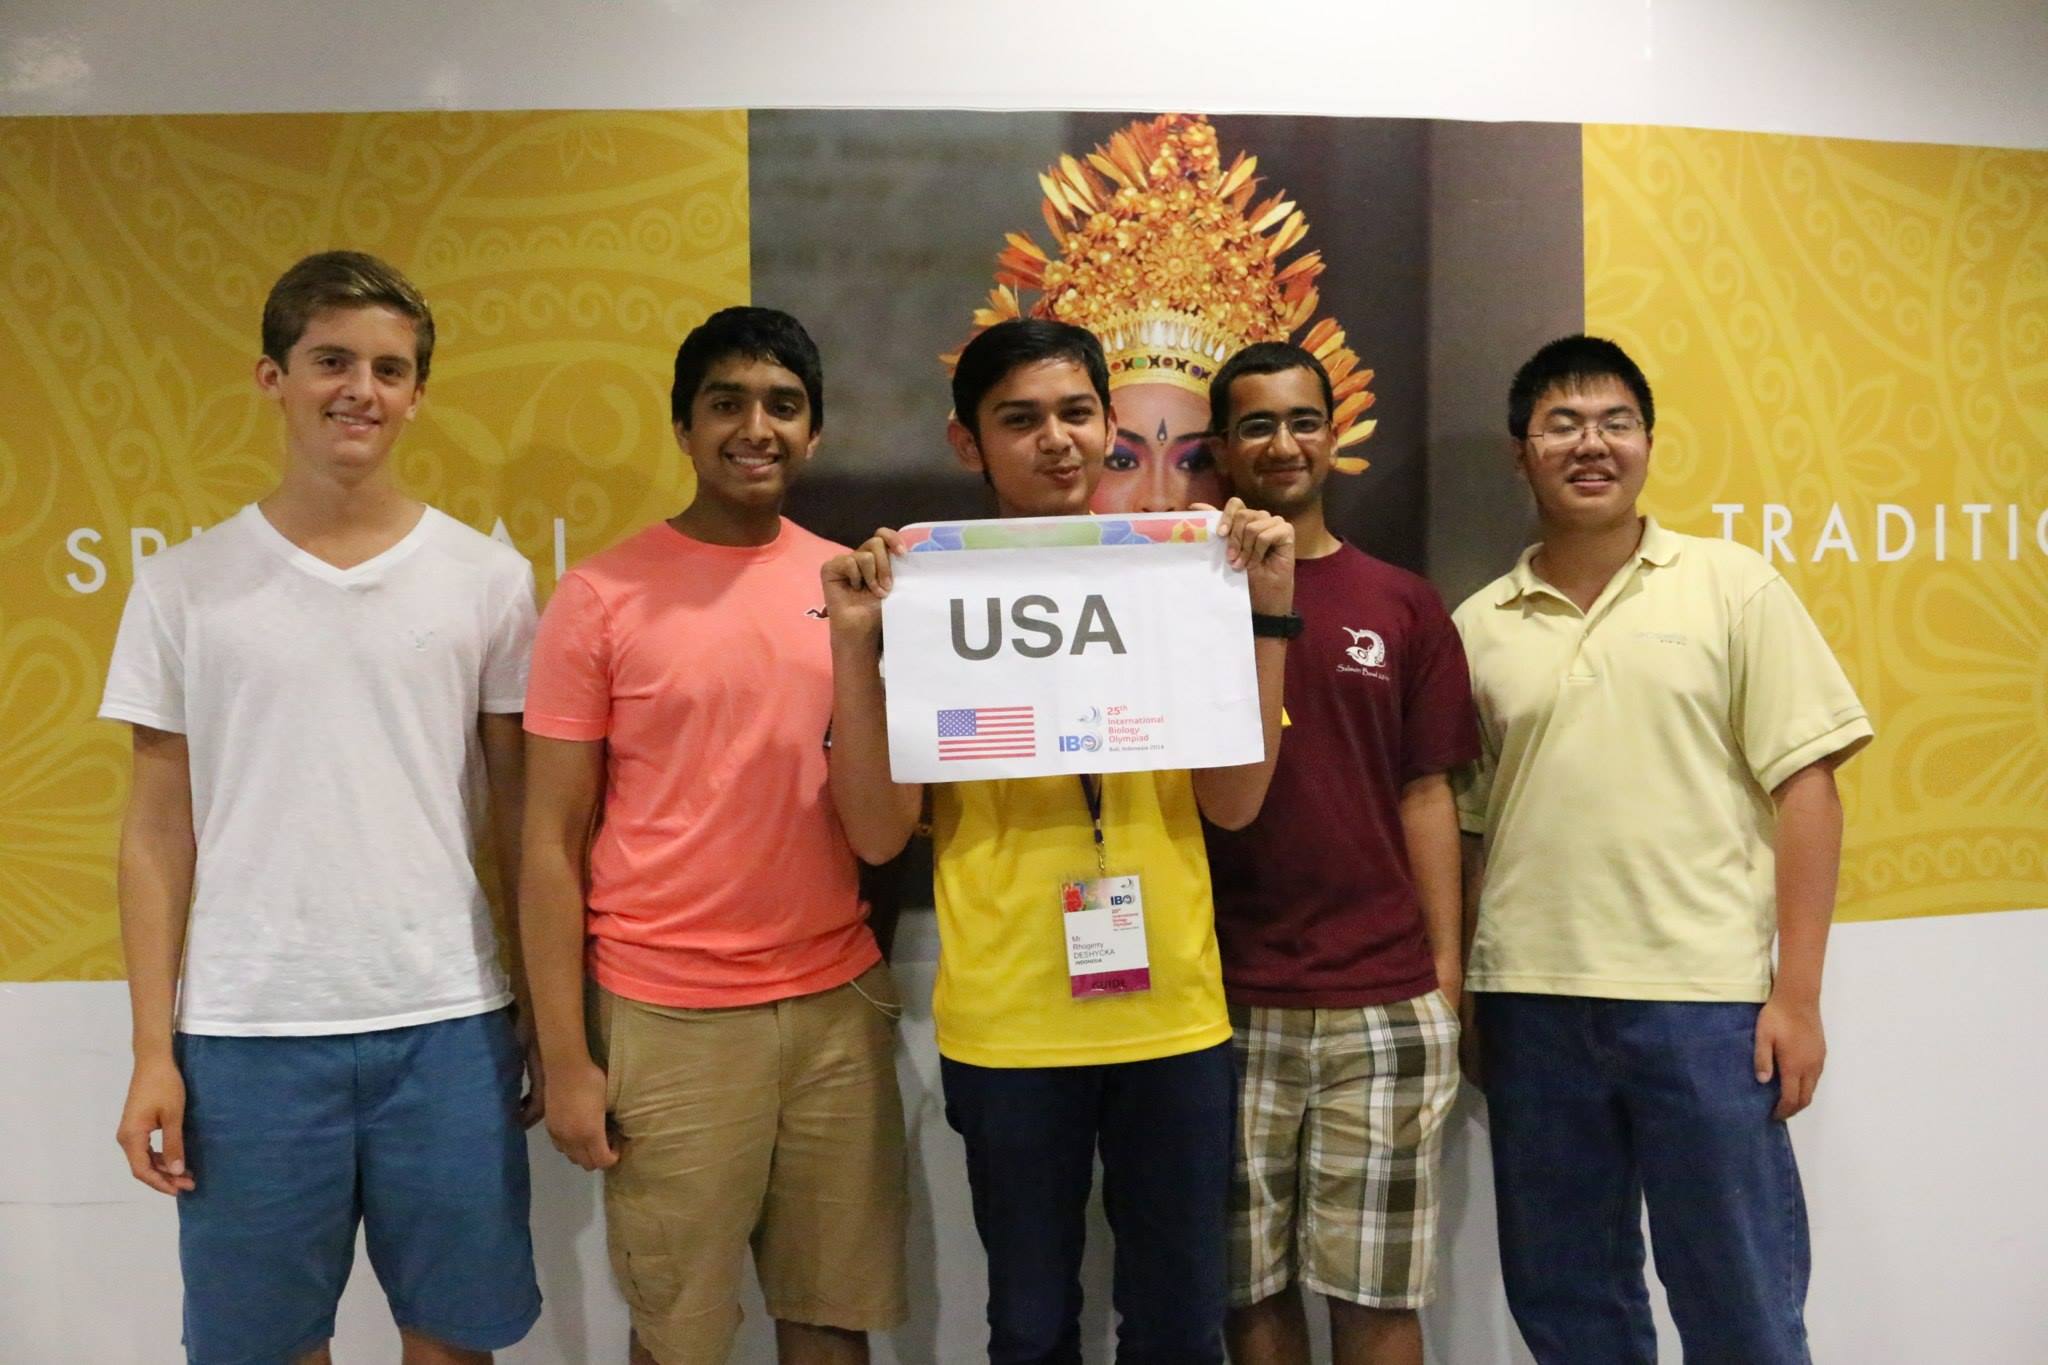 Team USA 2014 arrives at Bali for the IBO after the completion of the USABO National Finals